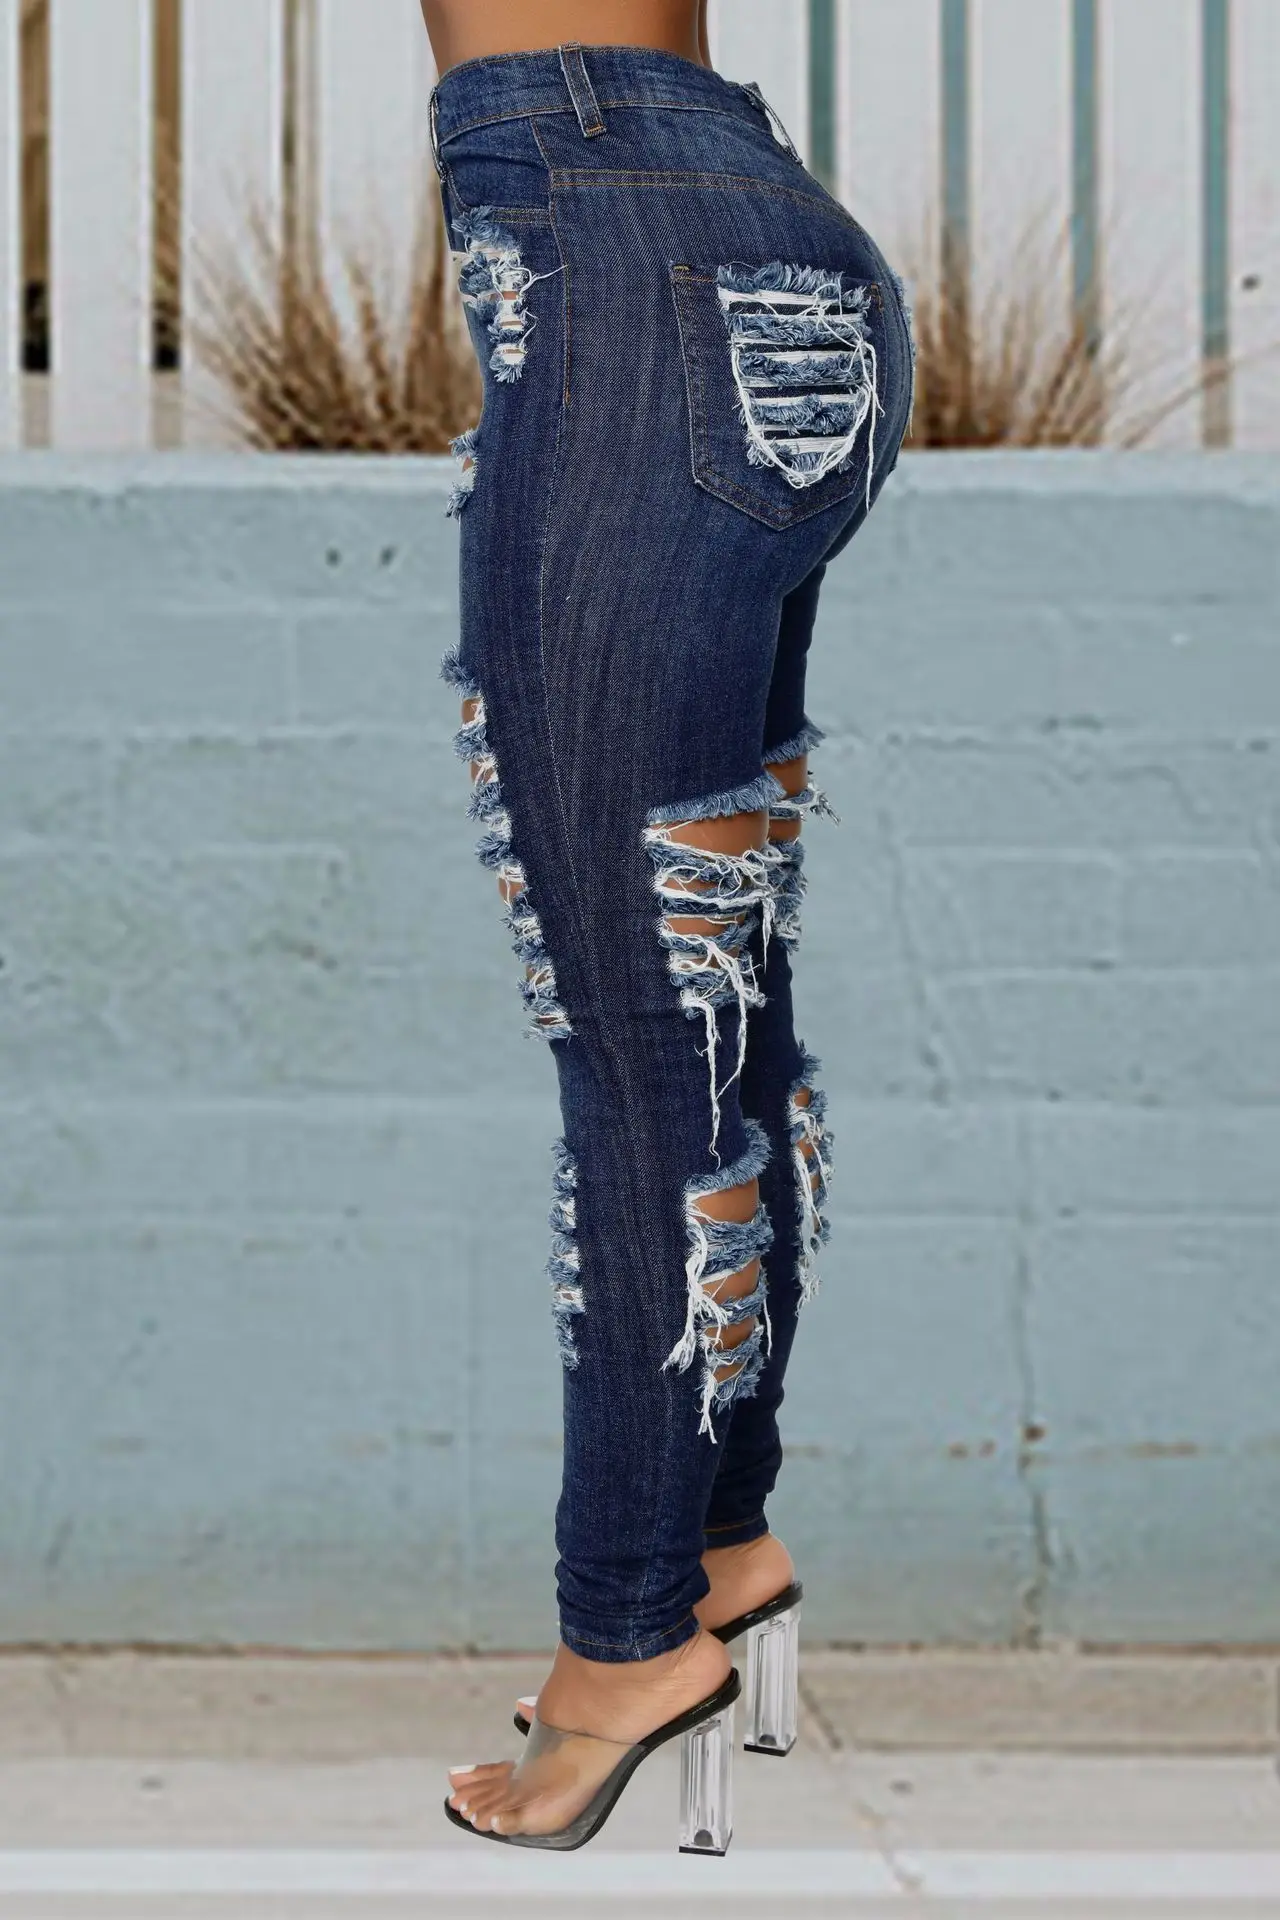 jl011 in stock ripped jeans pant